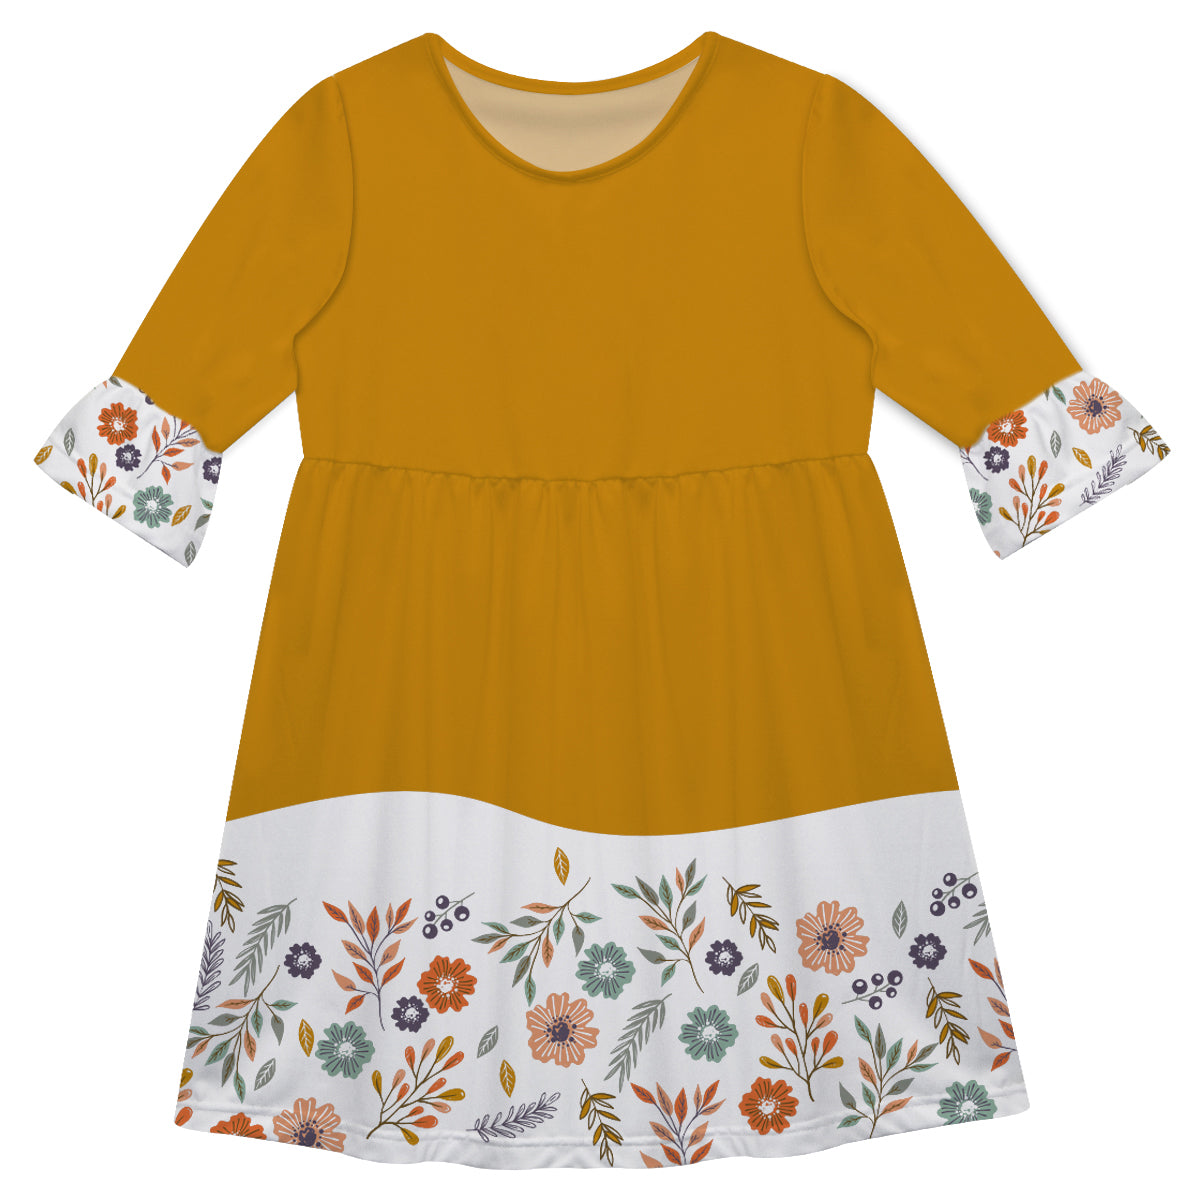 Girls mustar and white flowers dress with monogram - Wimziy&Co.